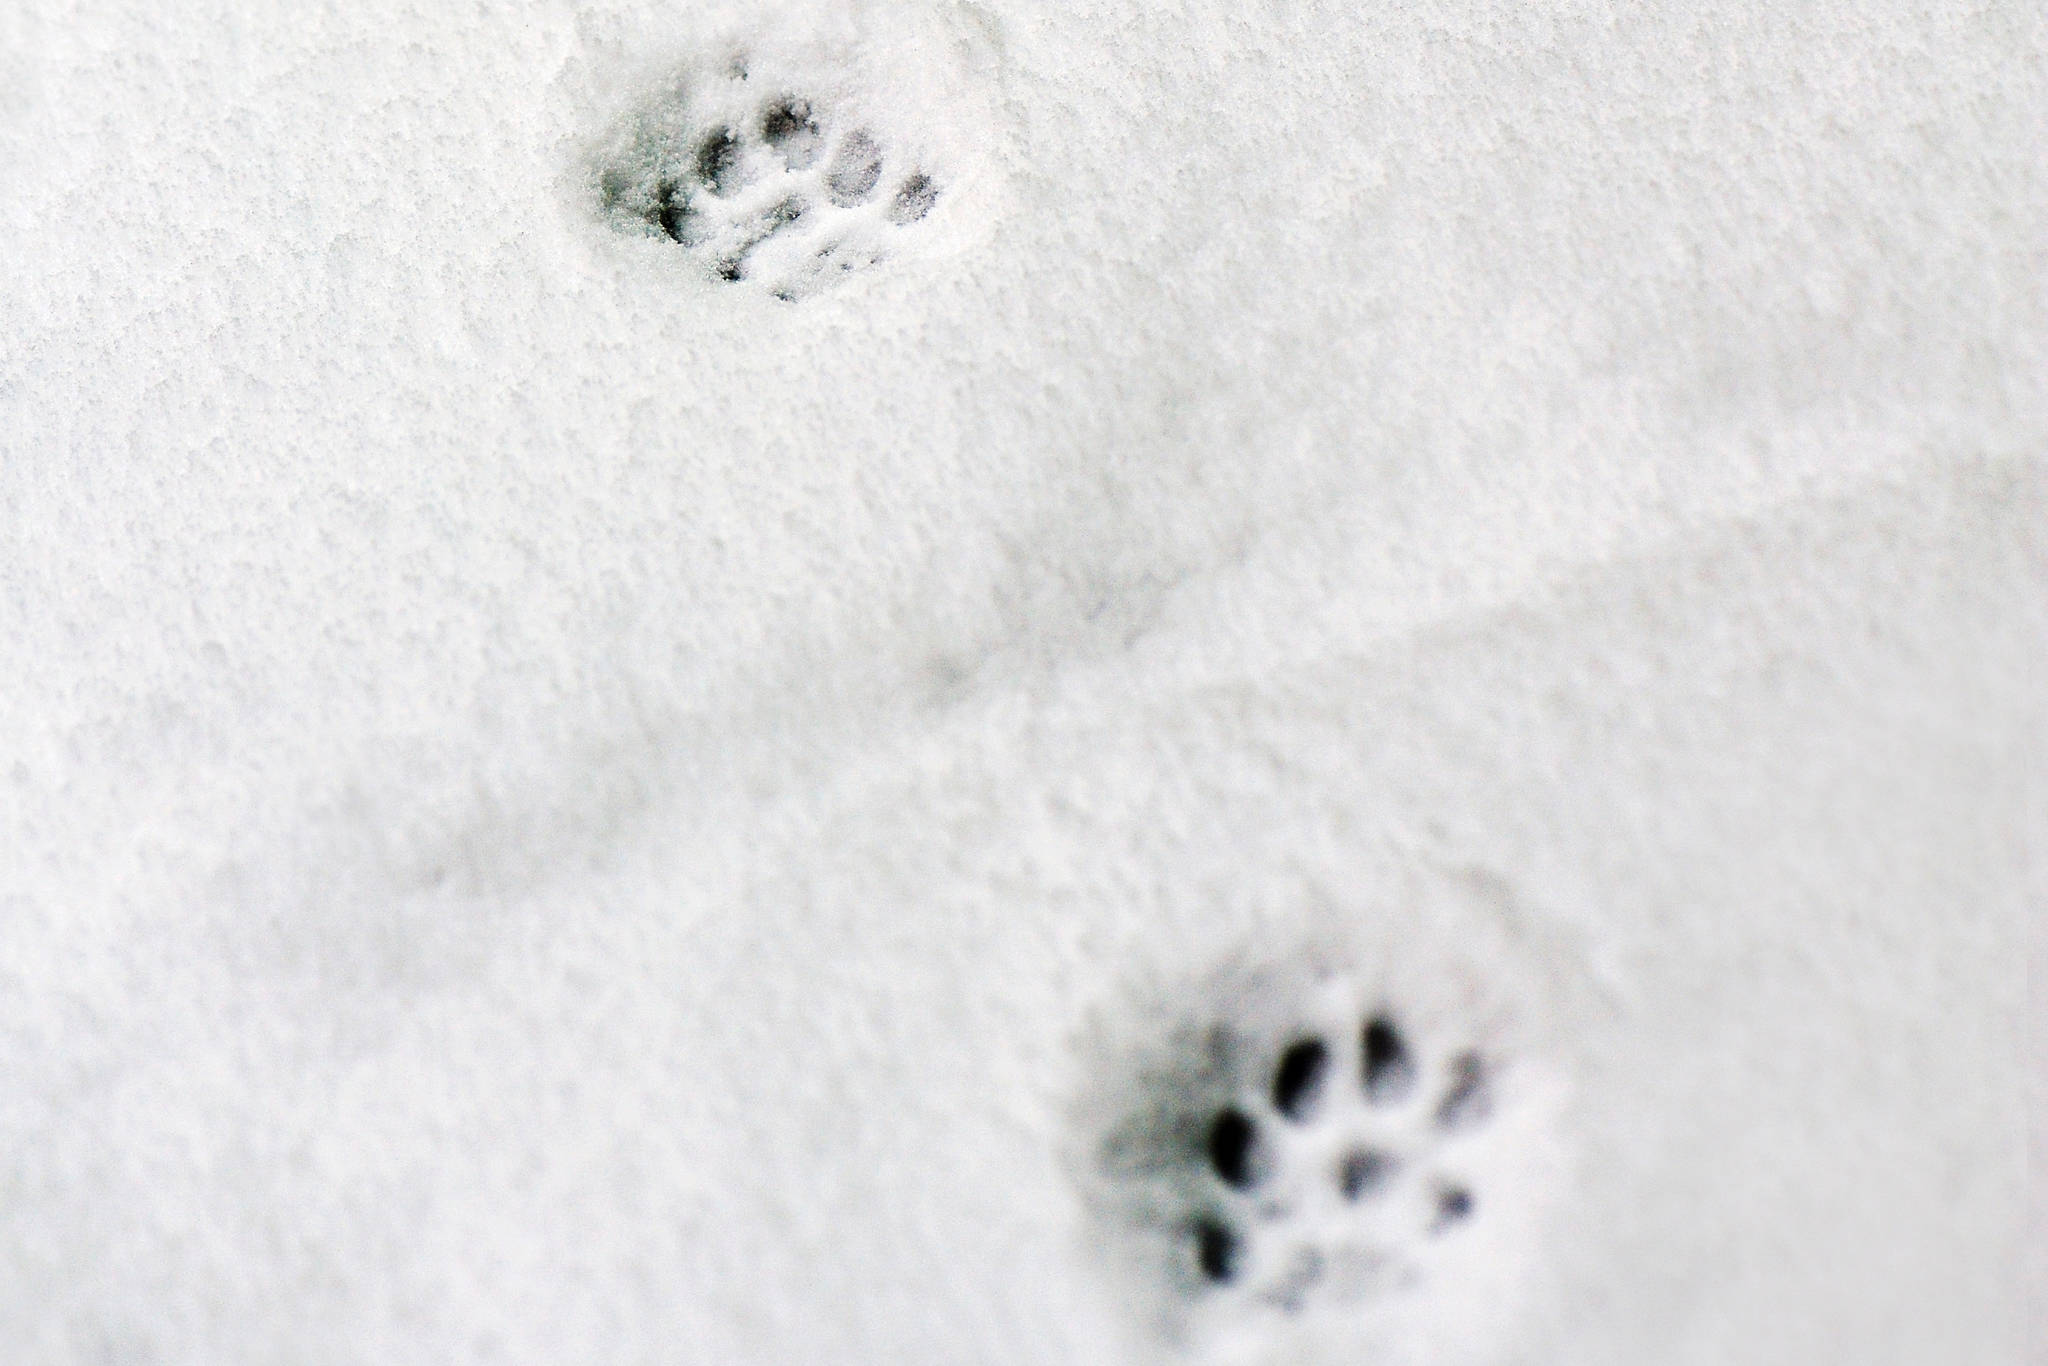 Tracking animal footprints in the snow